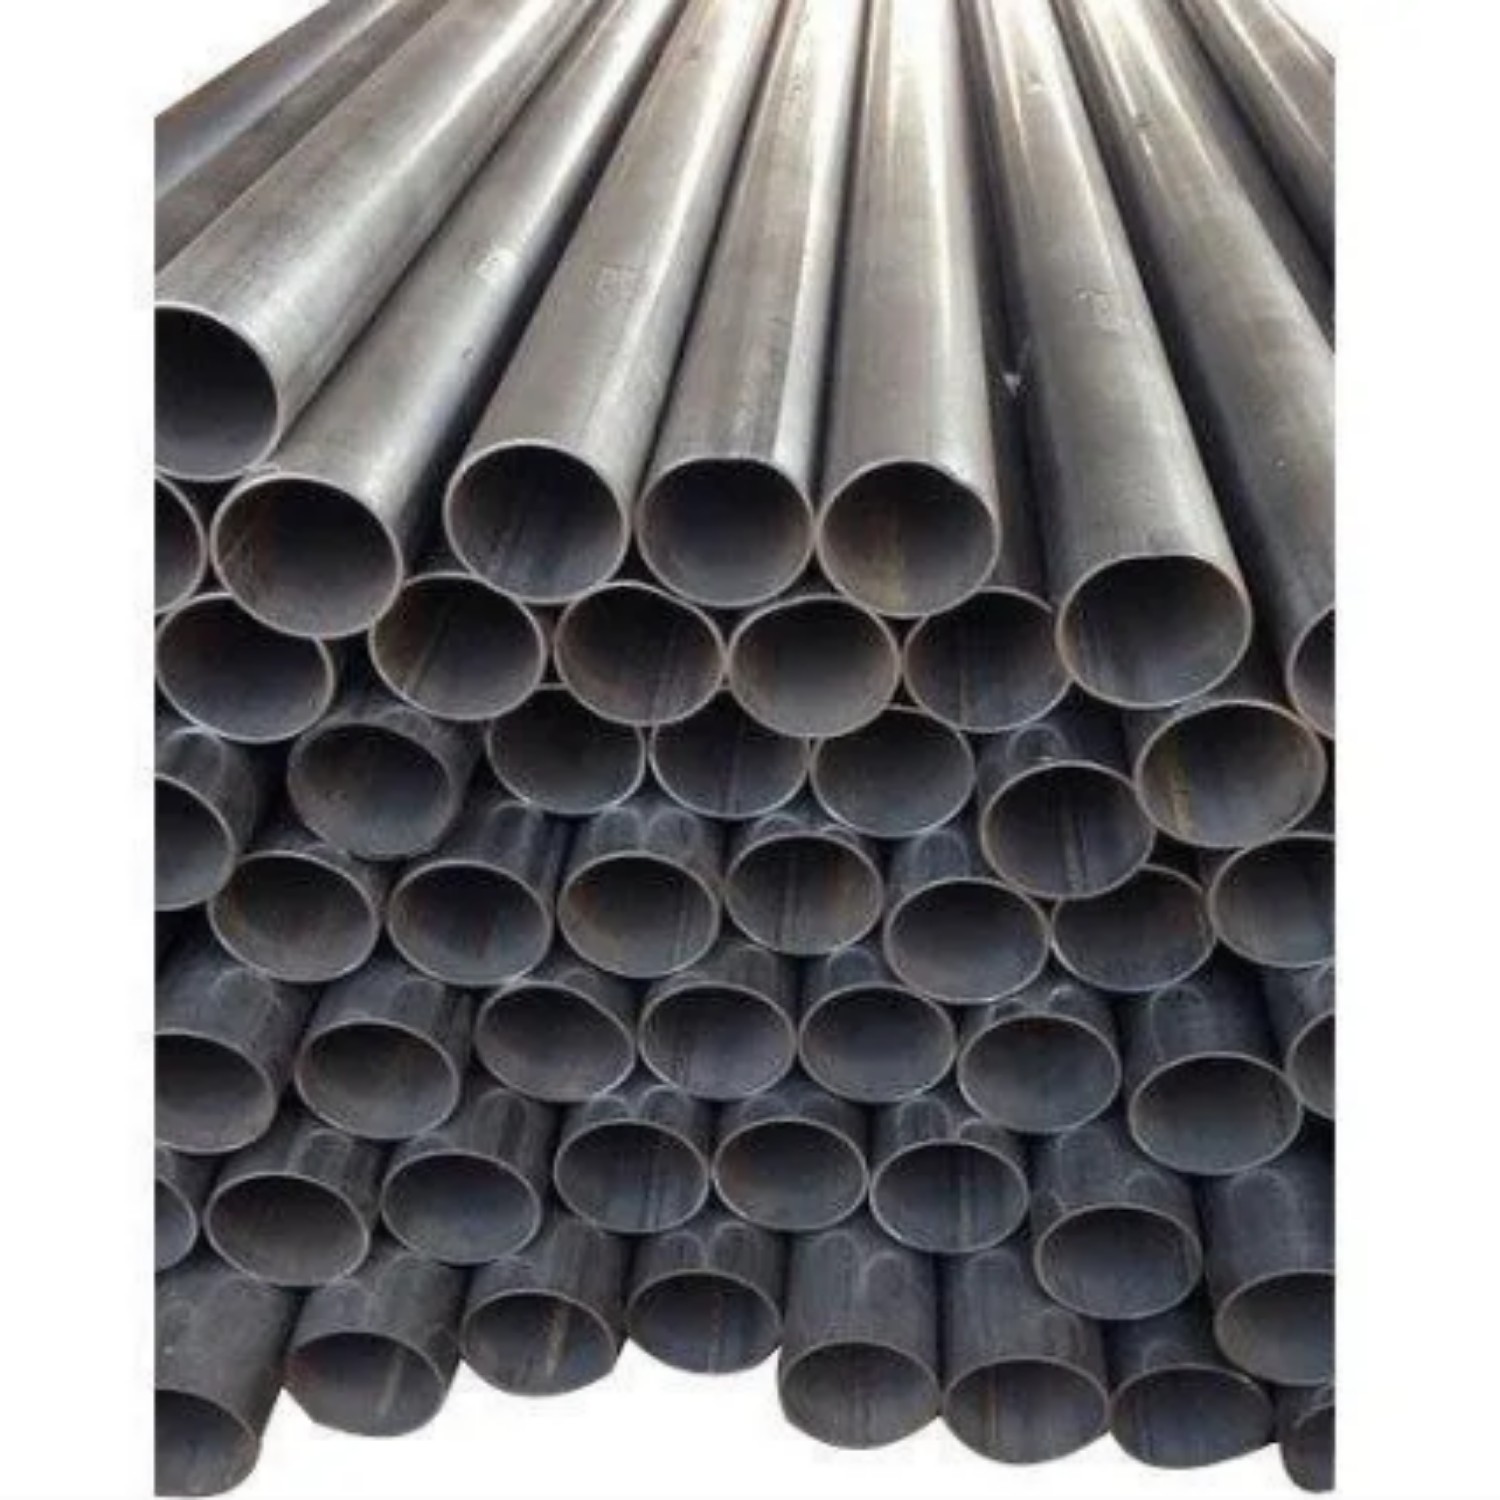 Apollo Pipes and Steels | Apollo Pipes and Tubes In Chennai